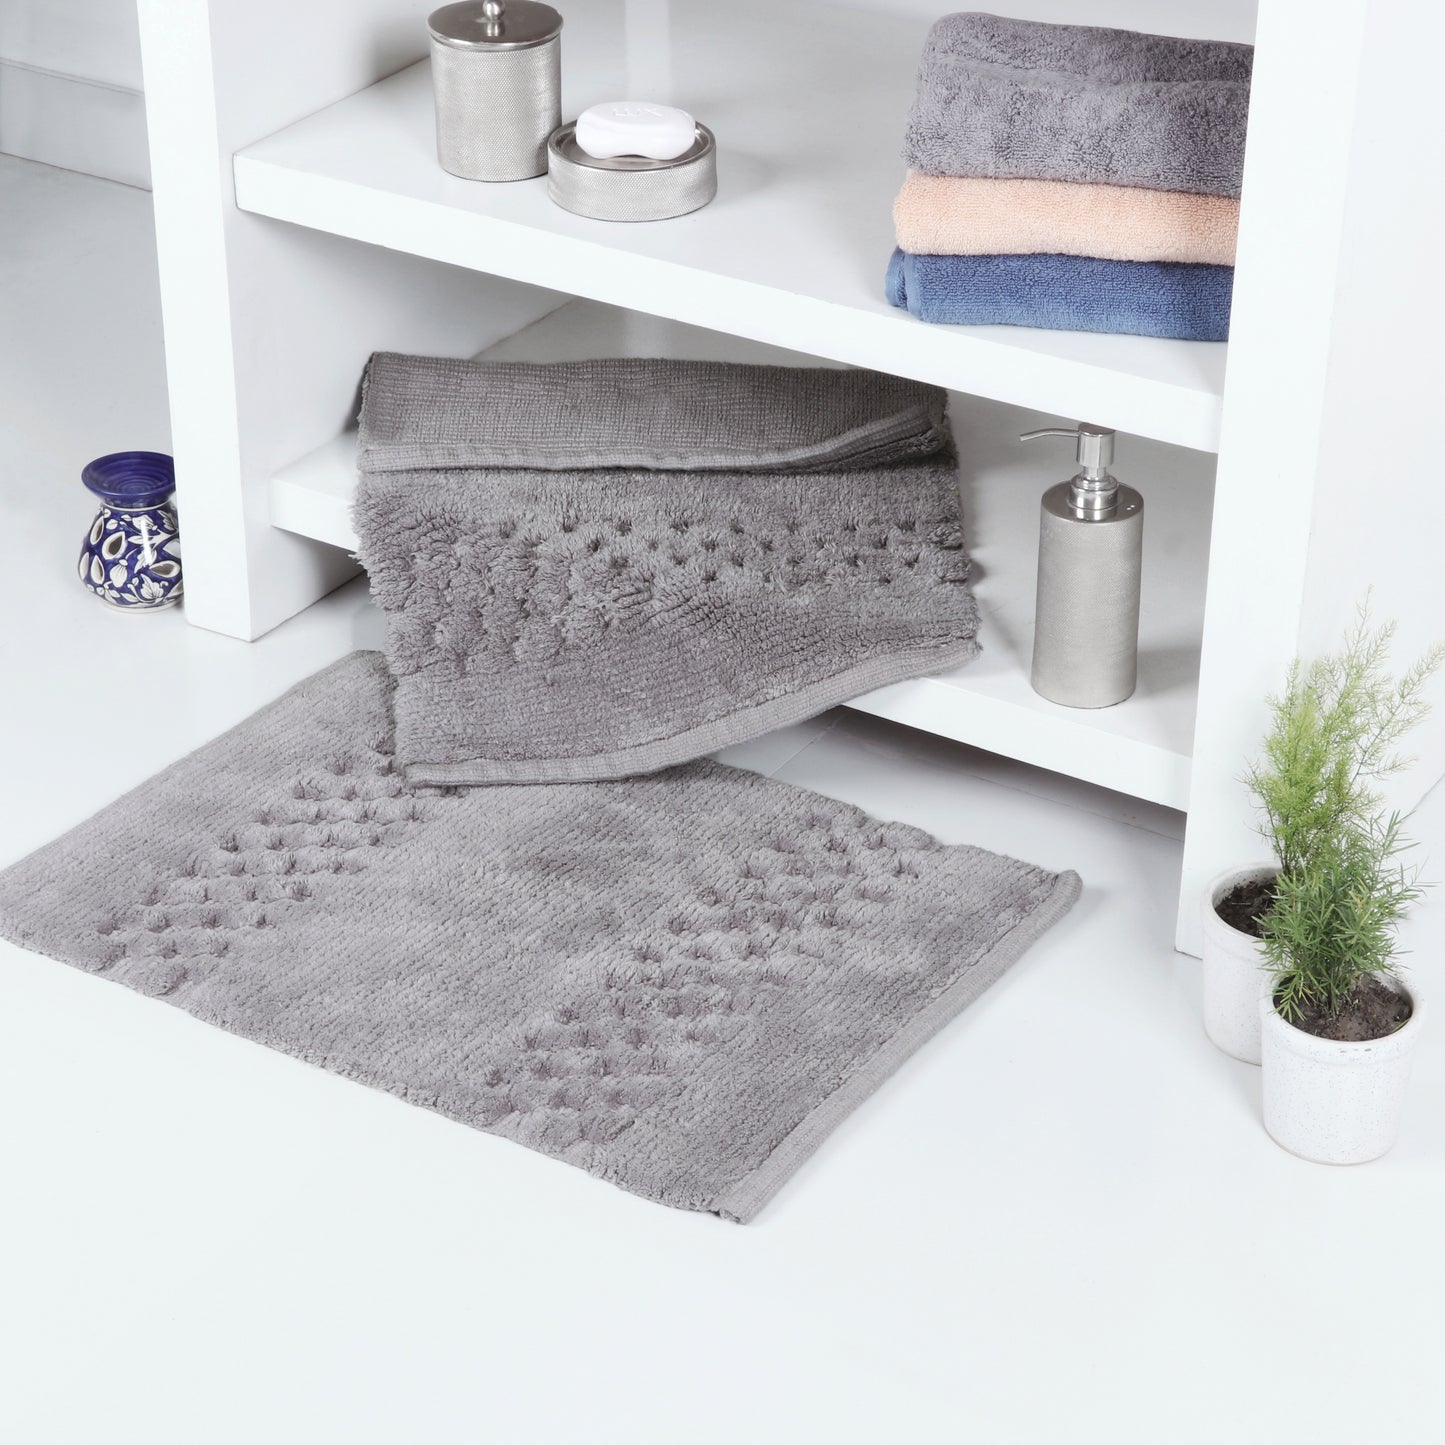 Combo Deal-Terry Towel 6 pc set and Honeycomb Bath rug 17x24/21x34 - TreeWool Bundle Deal#color_grey